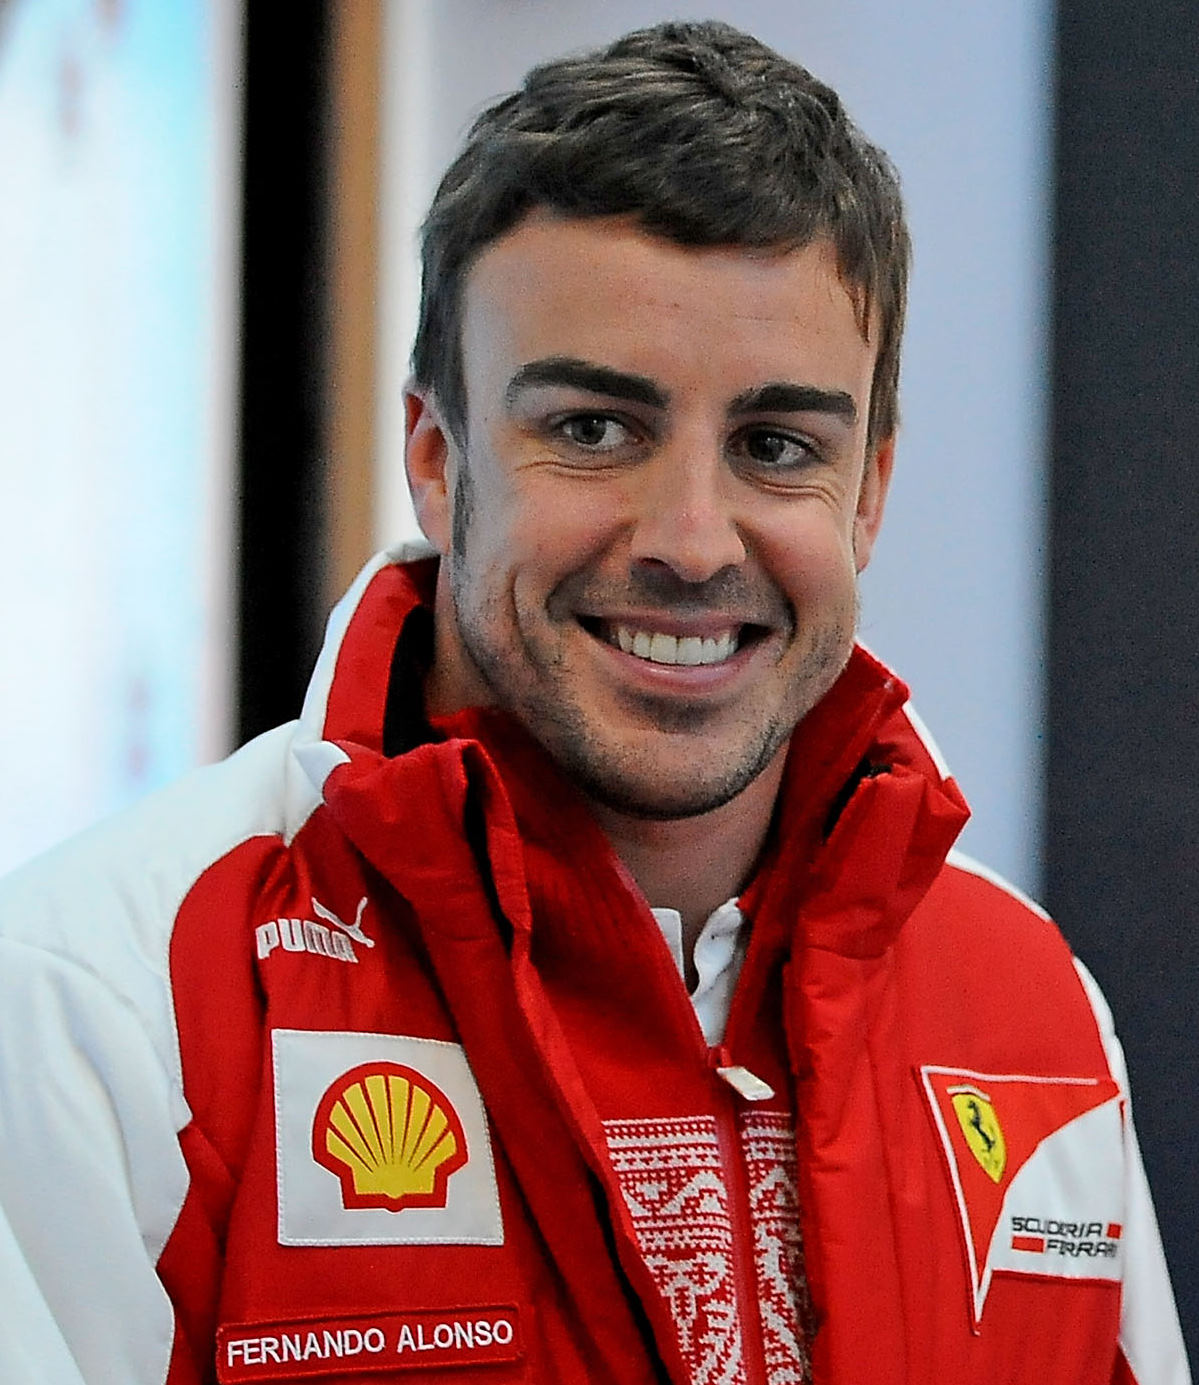 That puts an end to the Alonso to Ferrari rumors